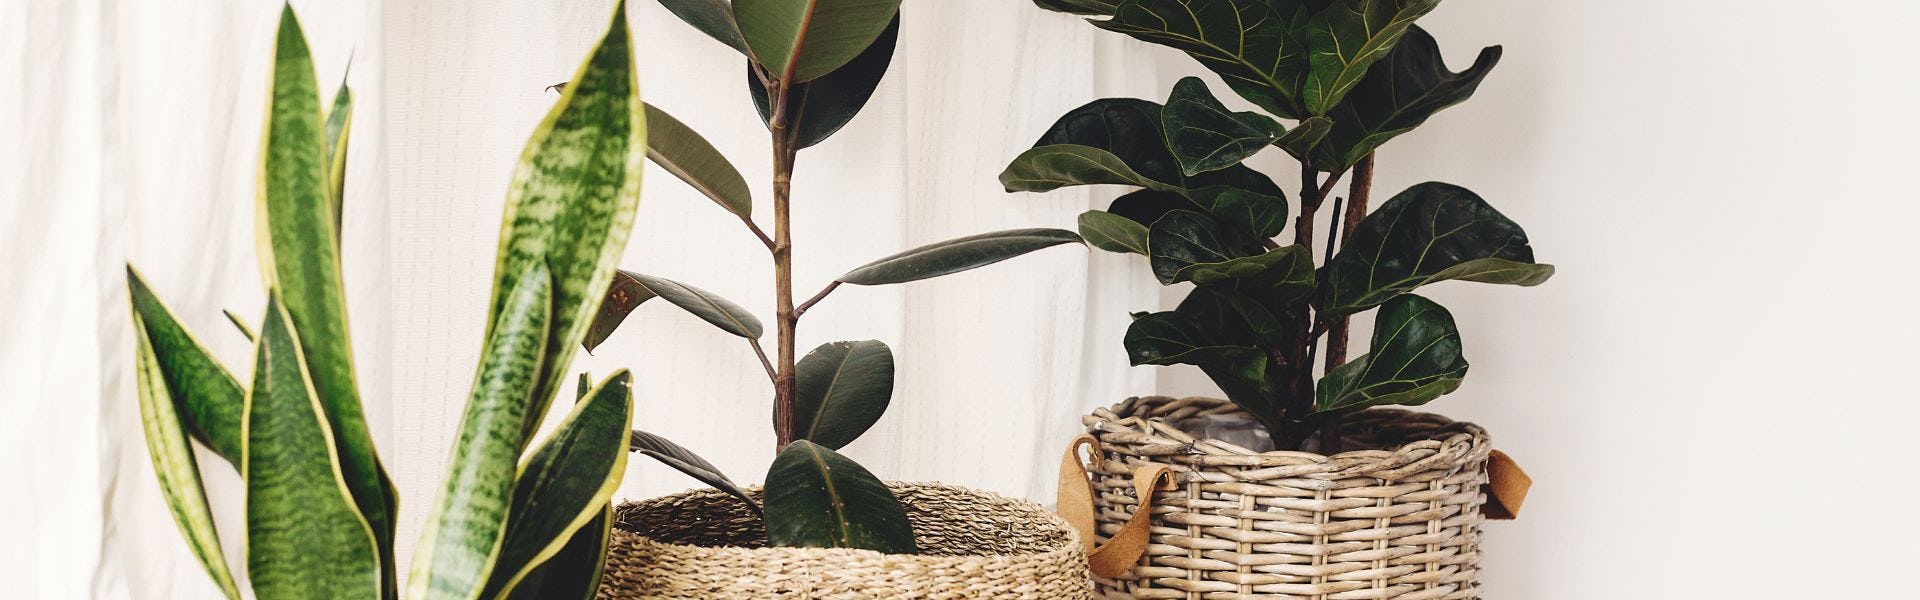 Houseplant that grow on stems banner